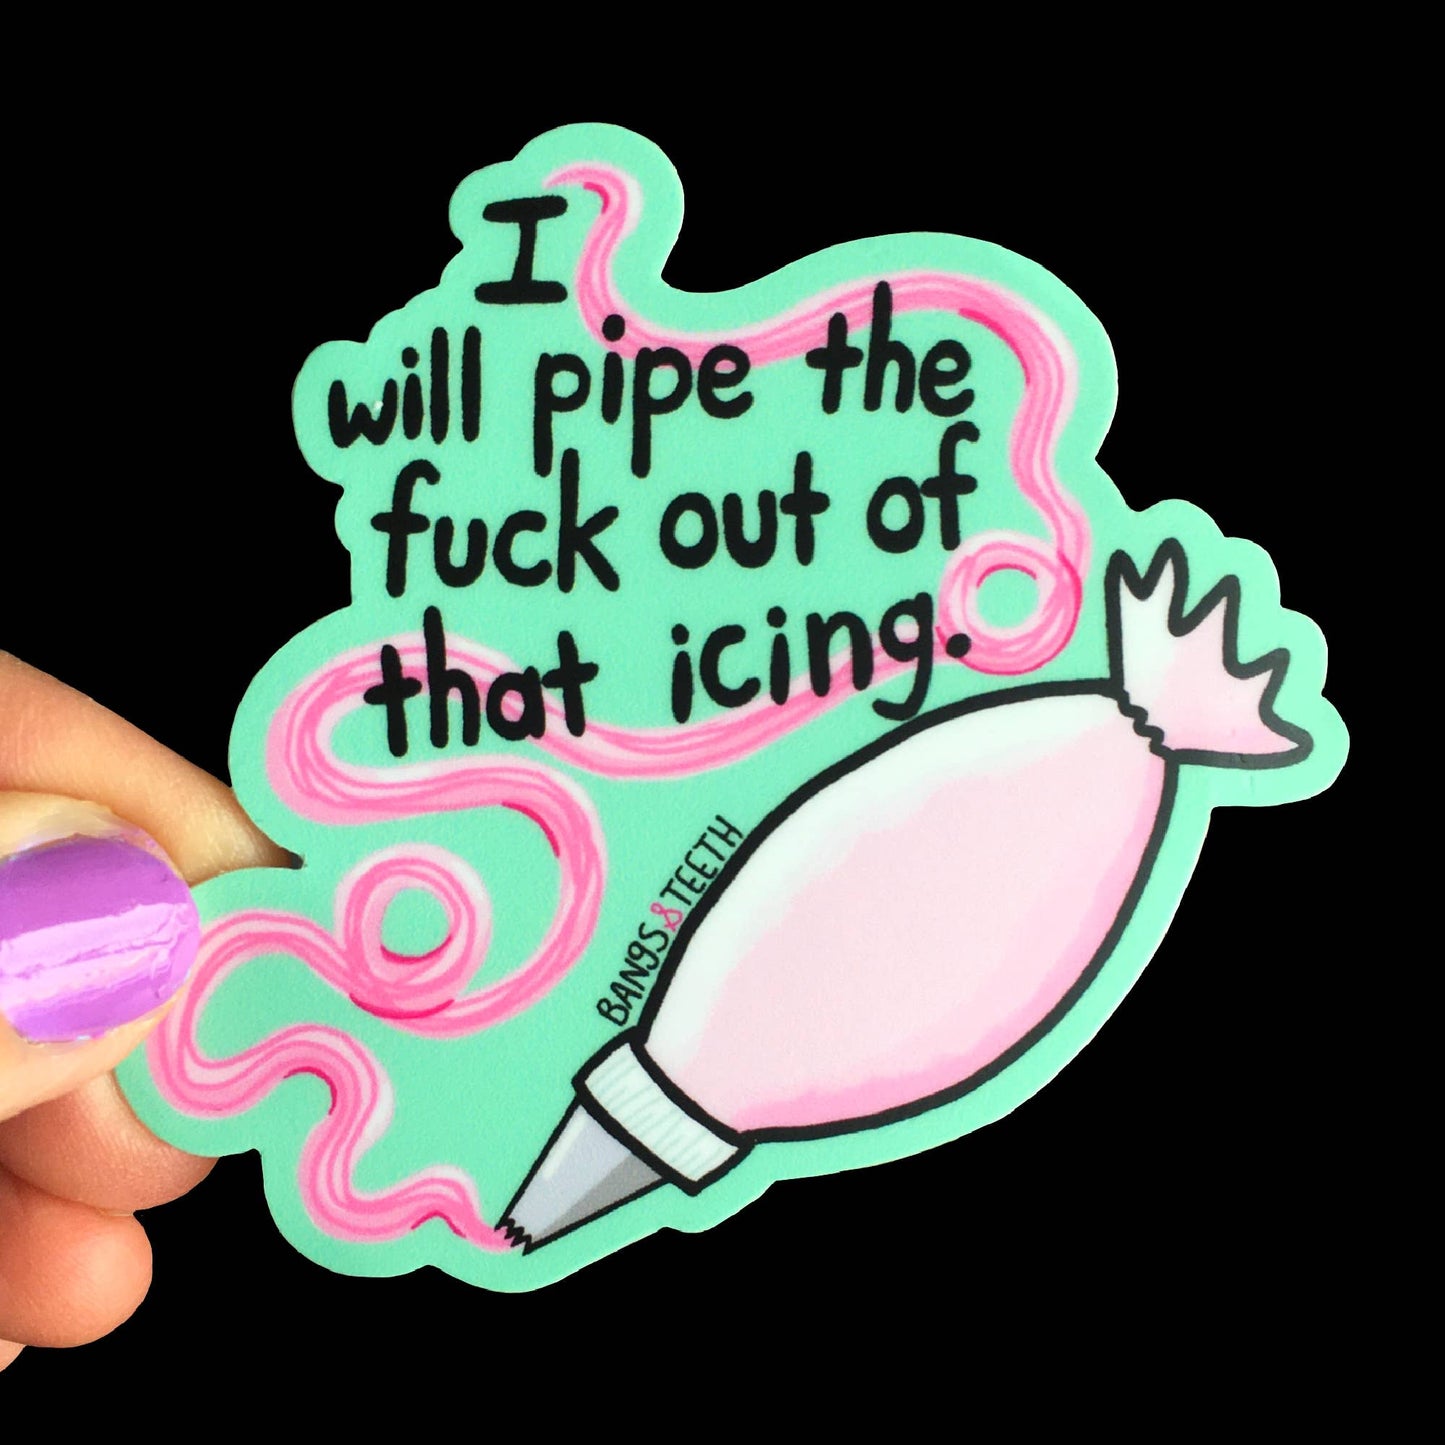 I Will Pipe The Fuck Out Of That Icing - funny vinyl sticker